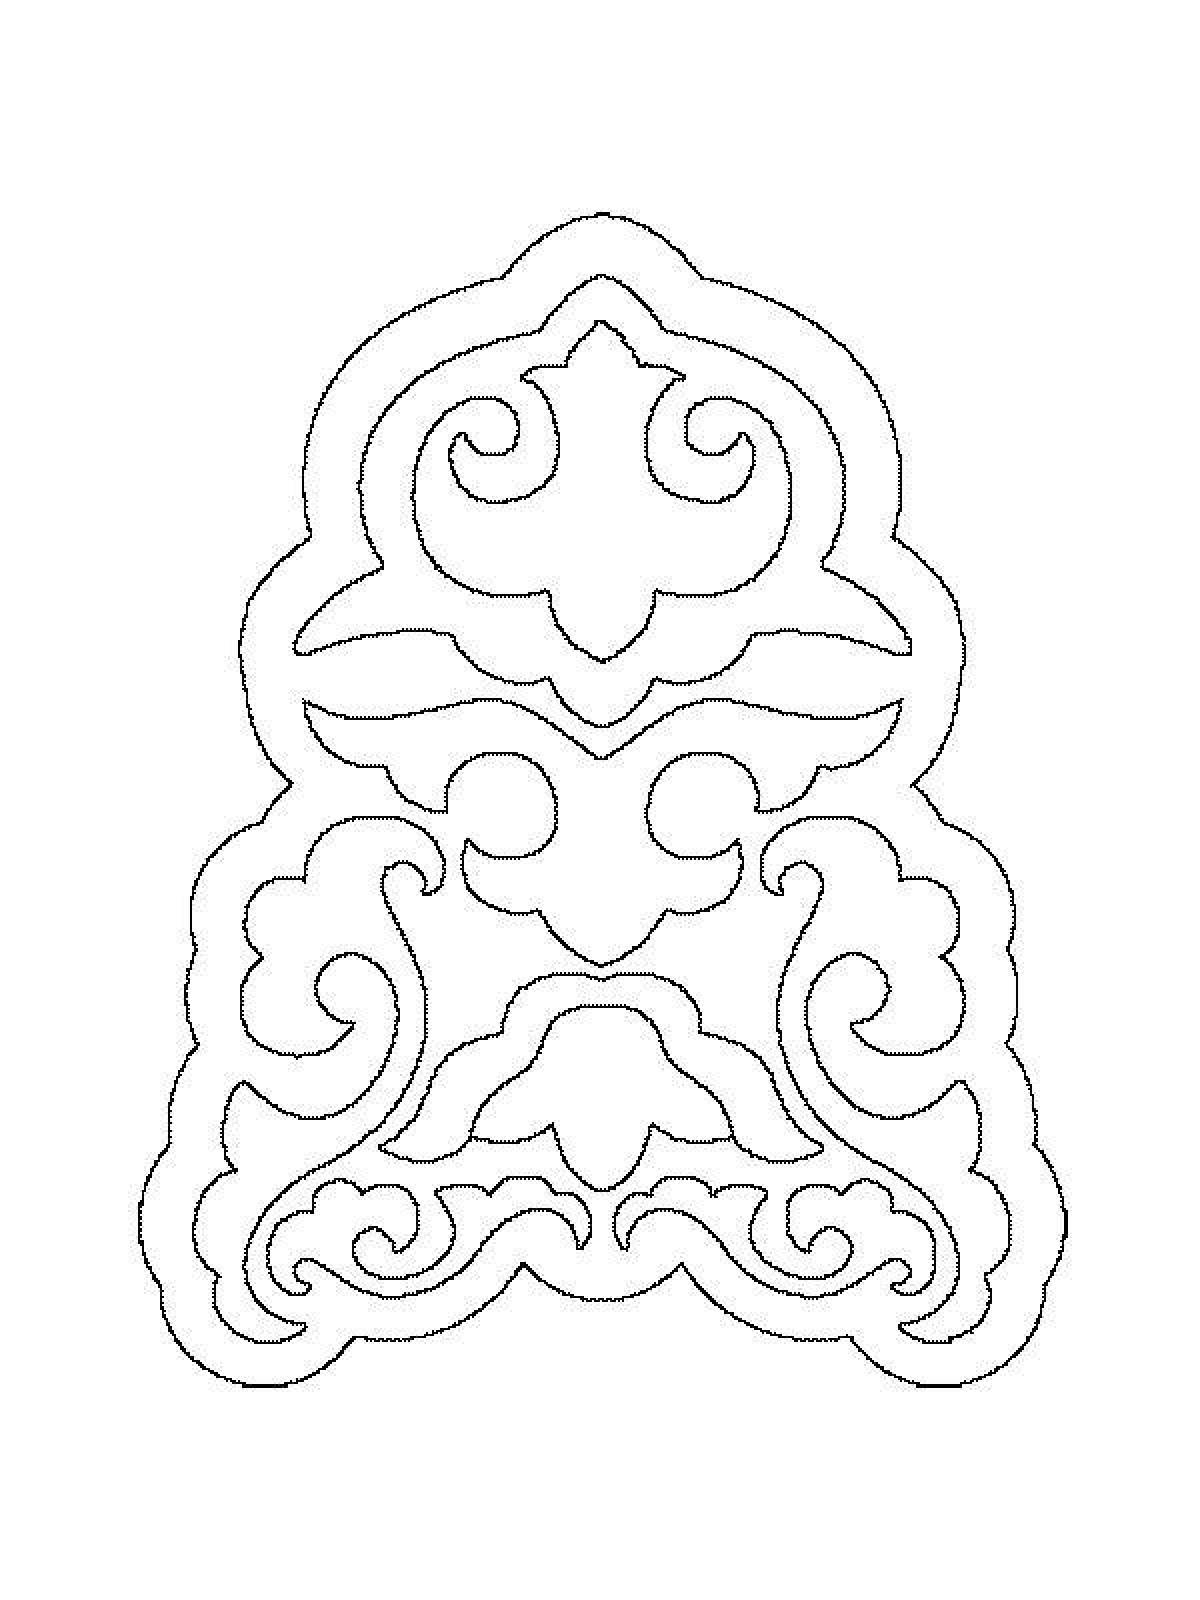 Coloring page colorful tatar ornament